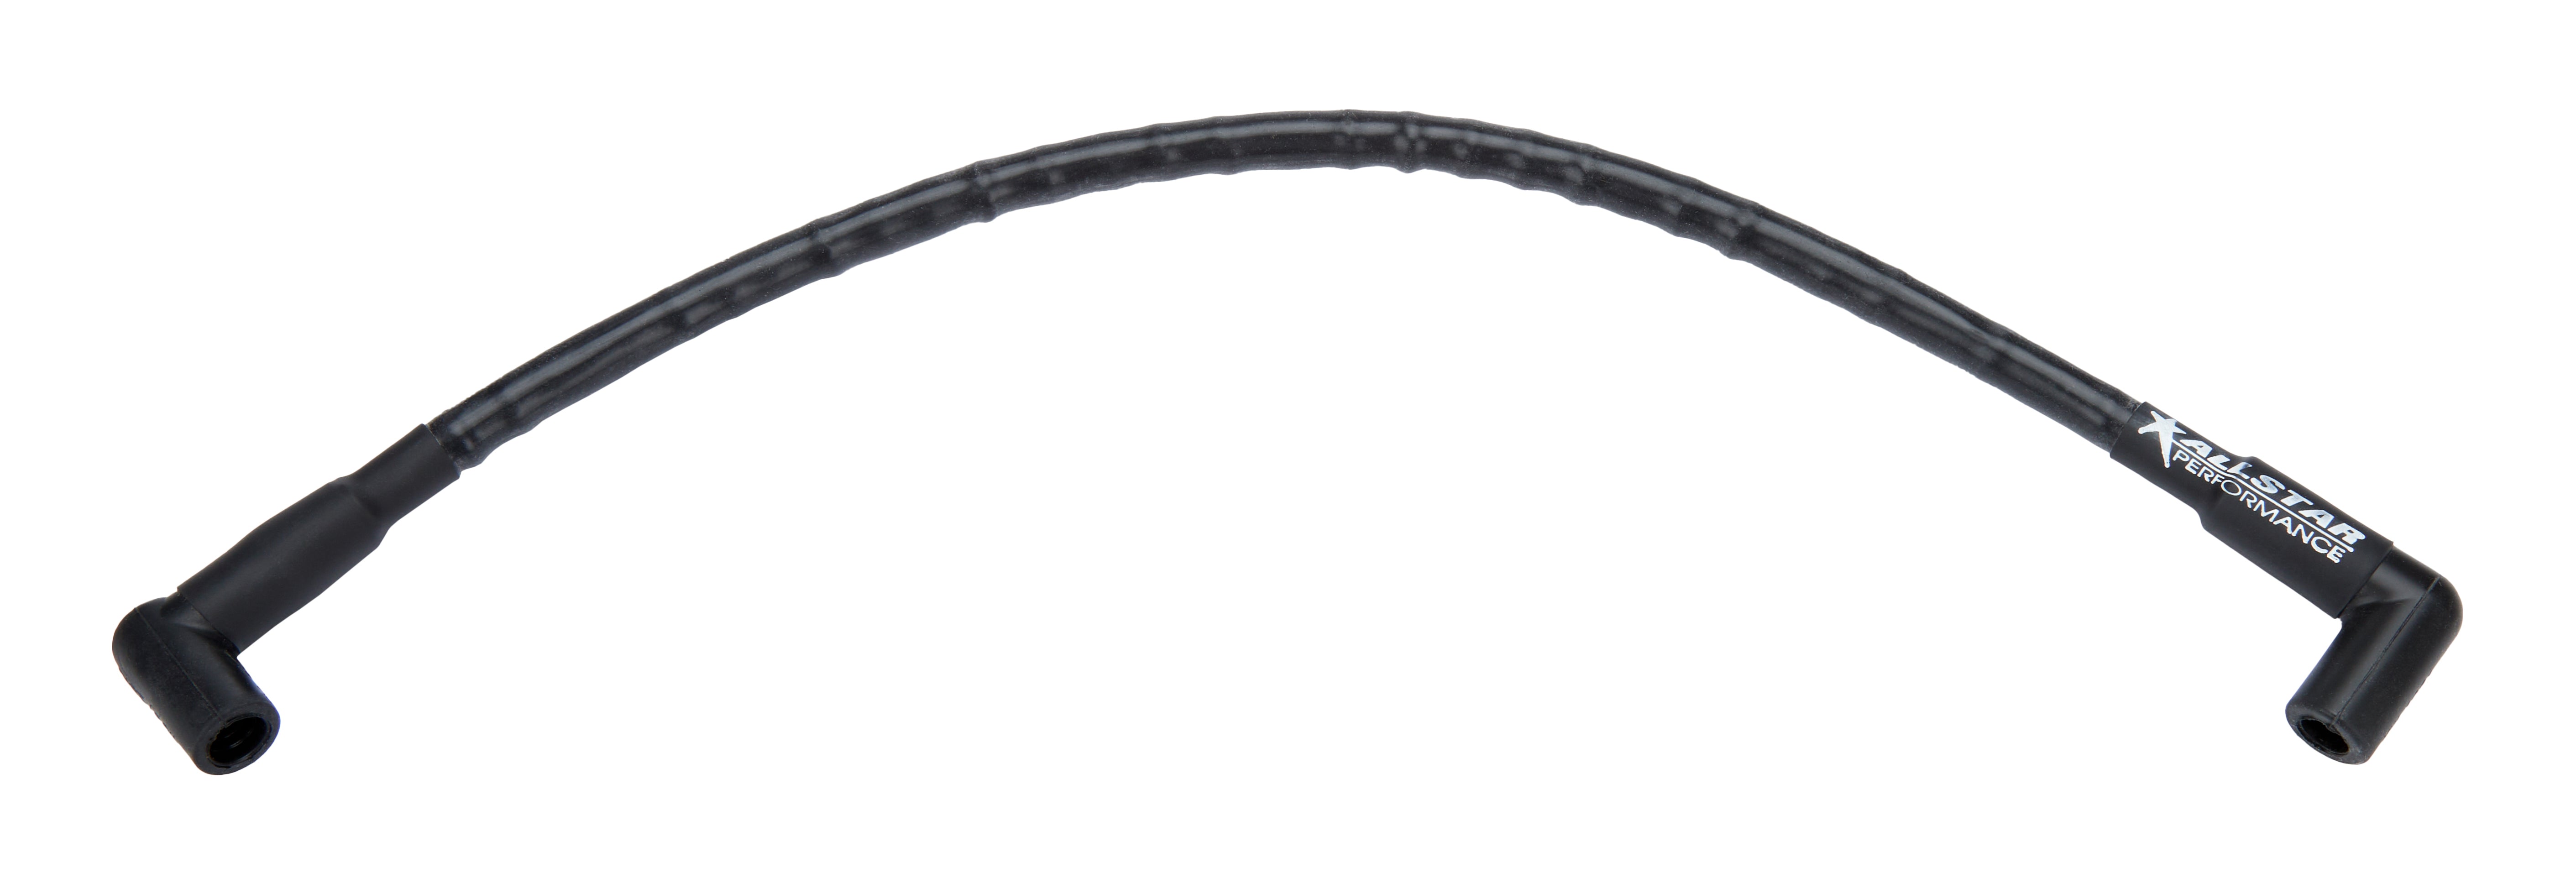 Allstar Performance Coil Wire w/ Sleeving 42in Ignition Components Ignition Coil Wires main image